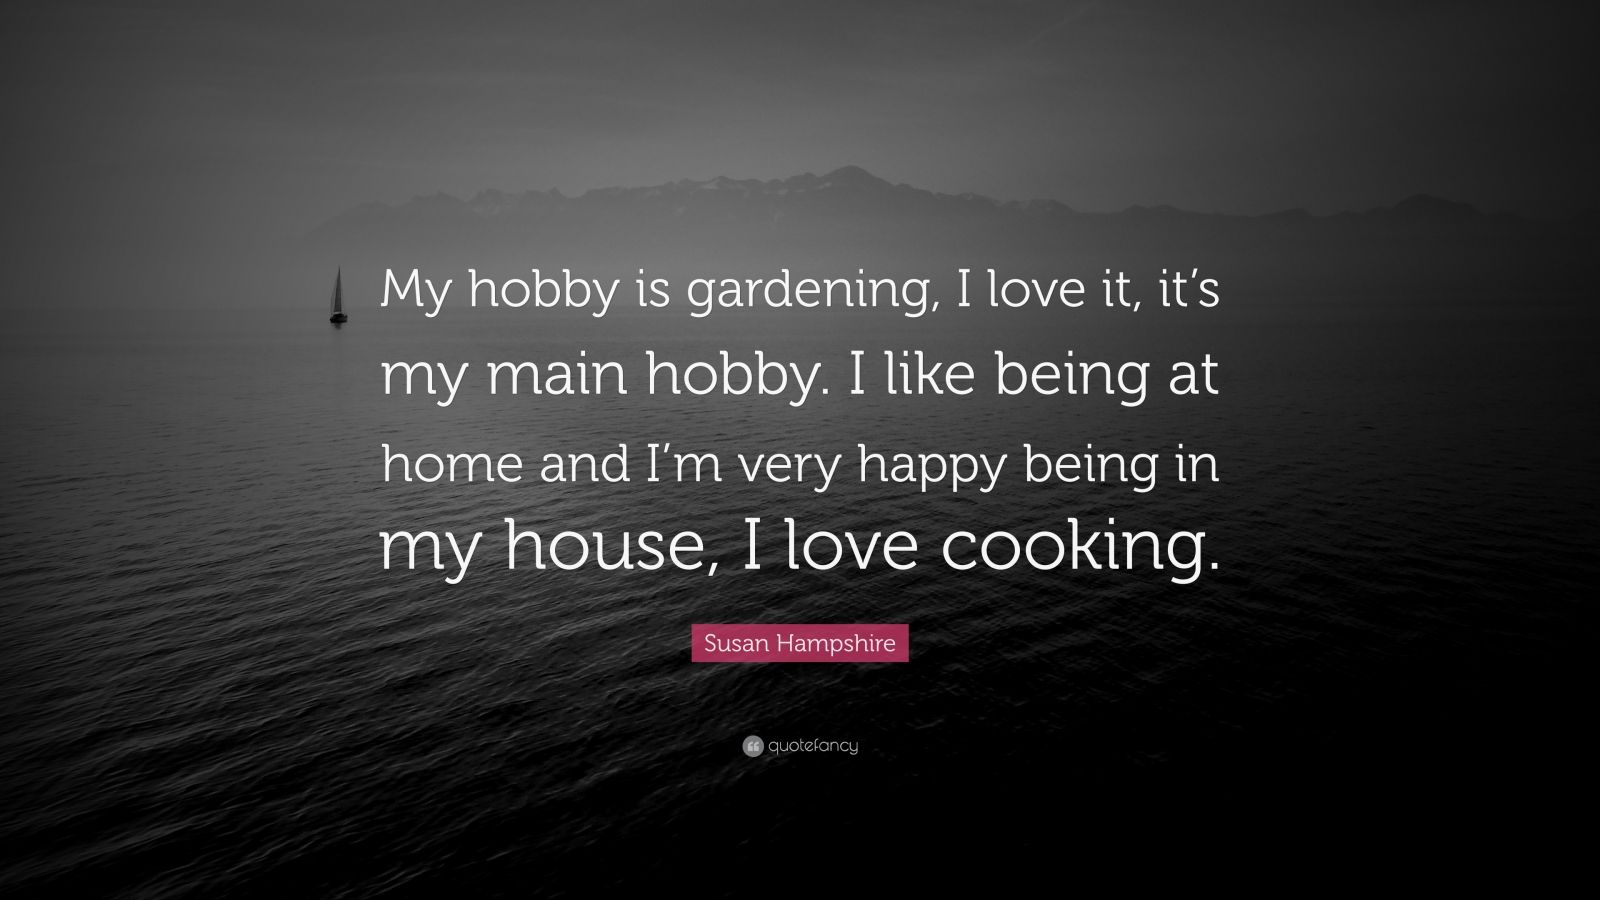 Susan Hampshire Quote “My hobby is gardening, I love it